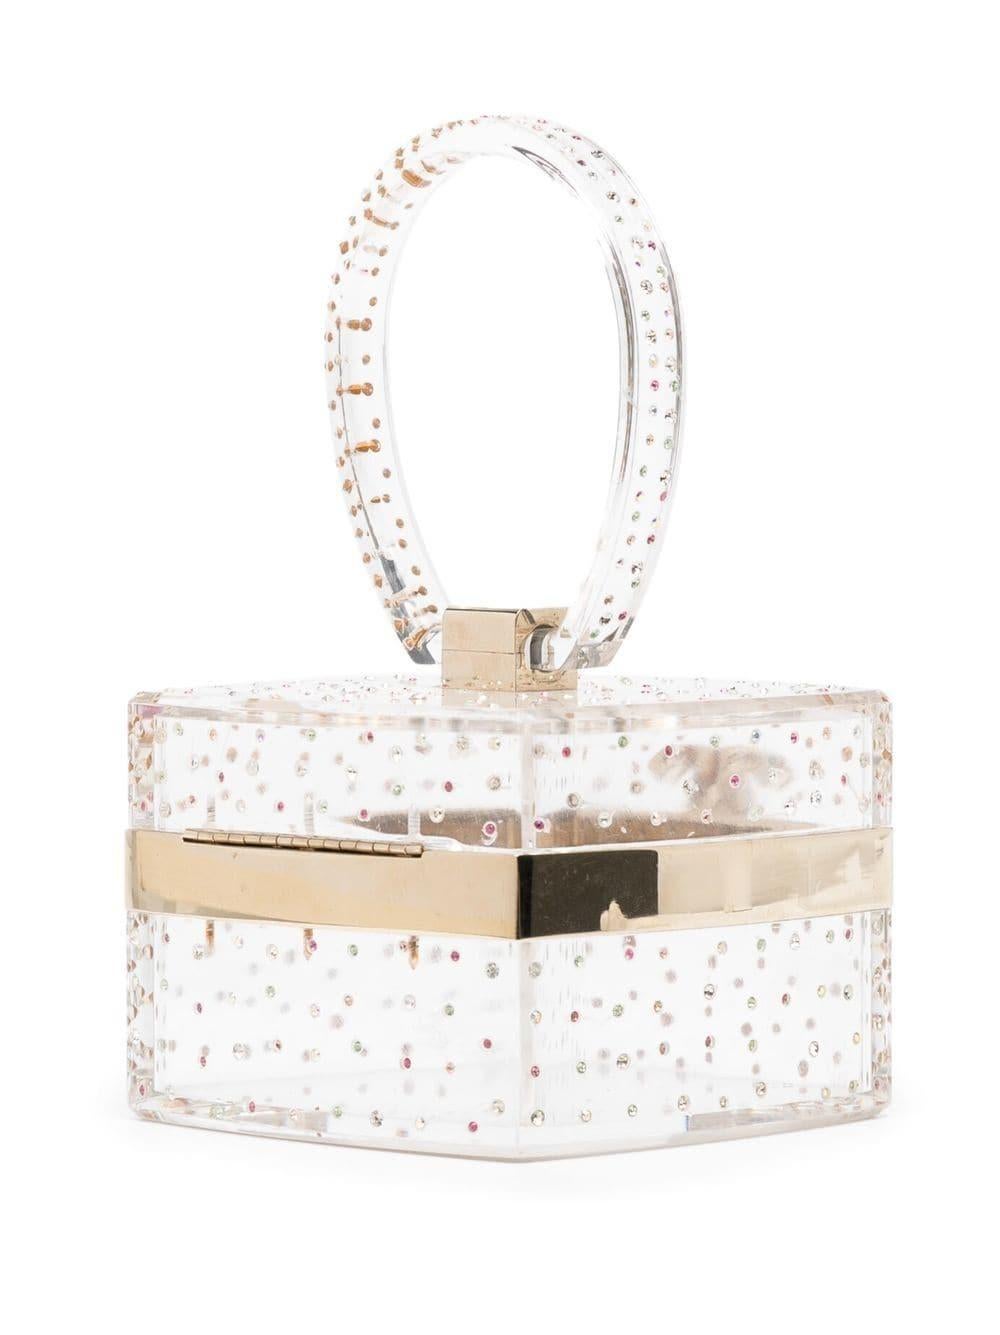 This rare and collectible CC rhinestone-embellished vanity mini bag from Chanel 2004 features a clear body with rhinestone embellishments and gold-tone hardware. Its signature interlocking CC logo sculpted on the front evokes Maison's founder, Coco